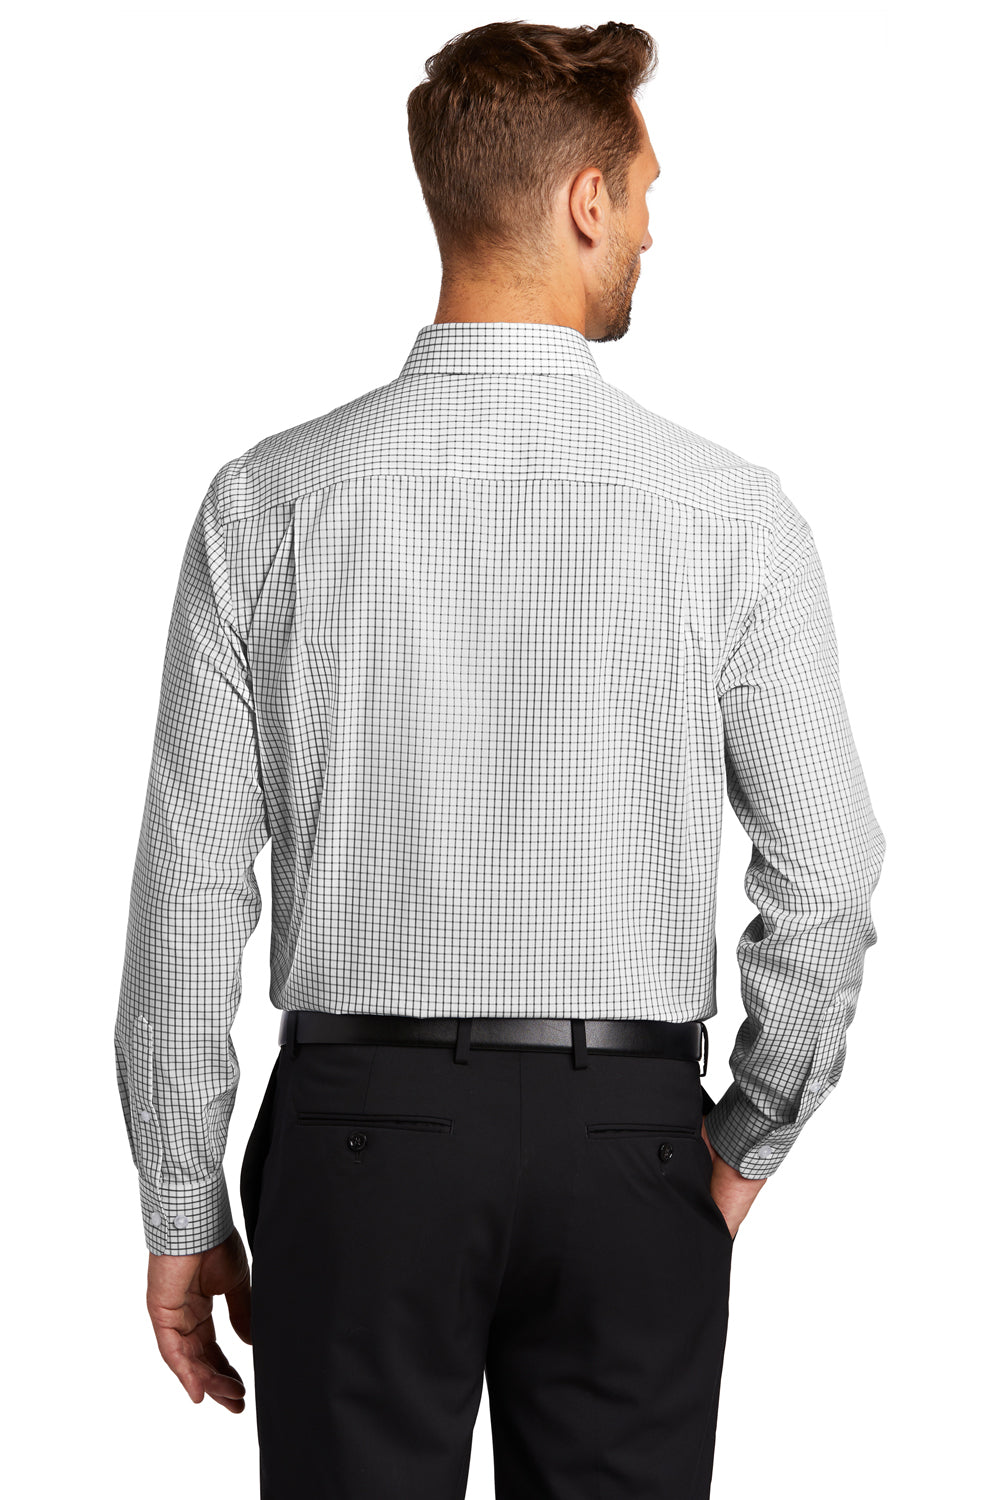 Red House Mens Open Ground Check Long Sleeve Button Down Shirt w/ Pocket Black/White Side